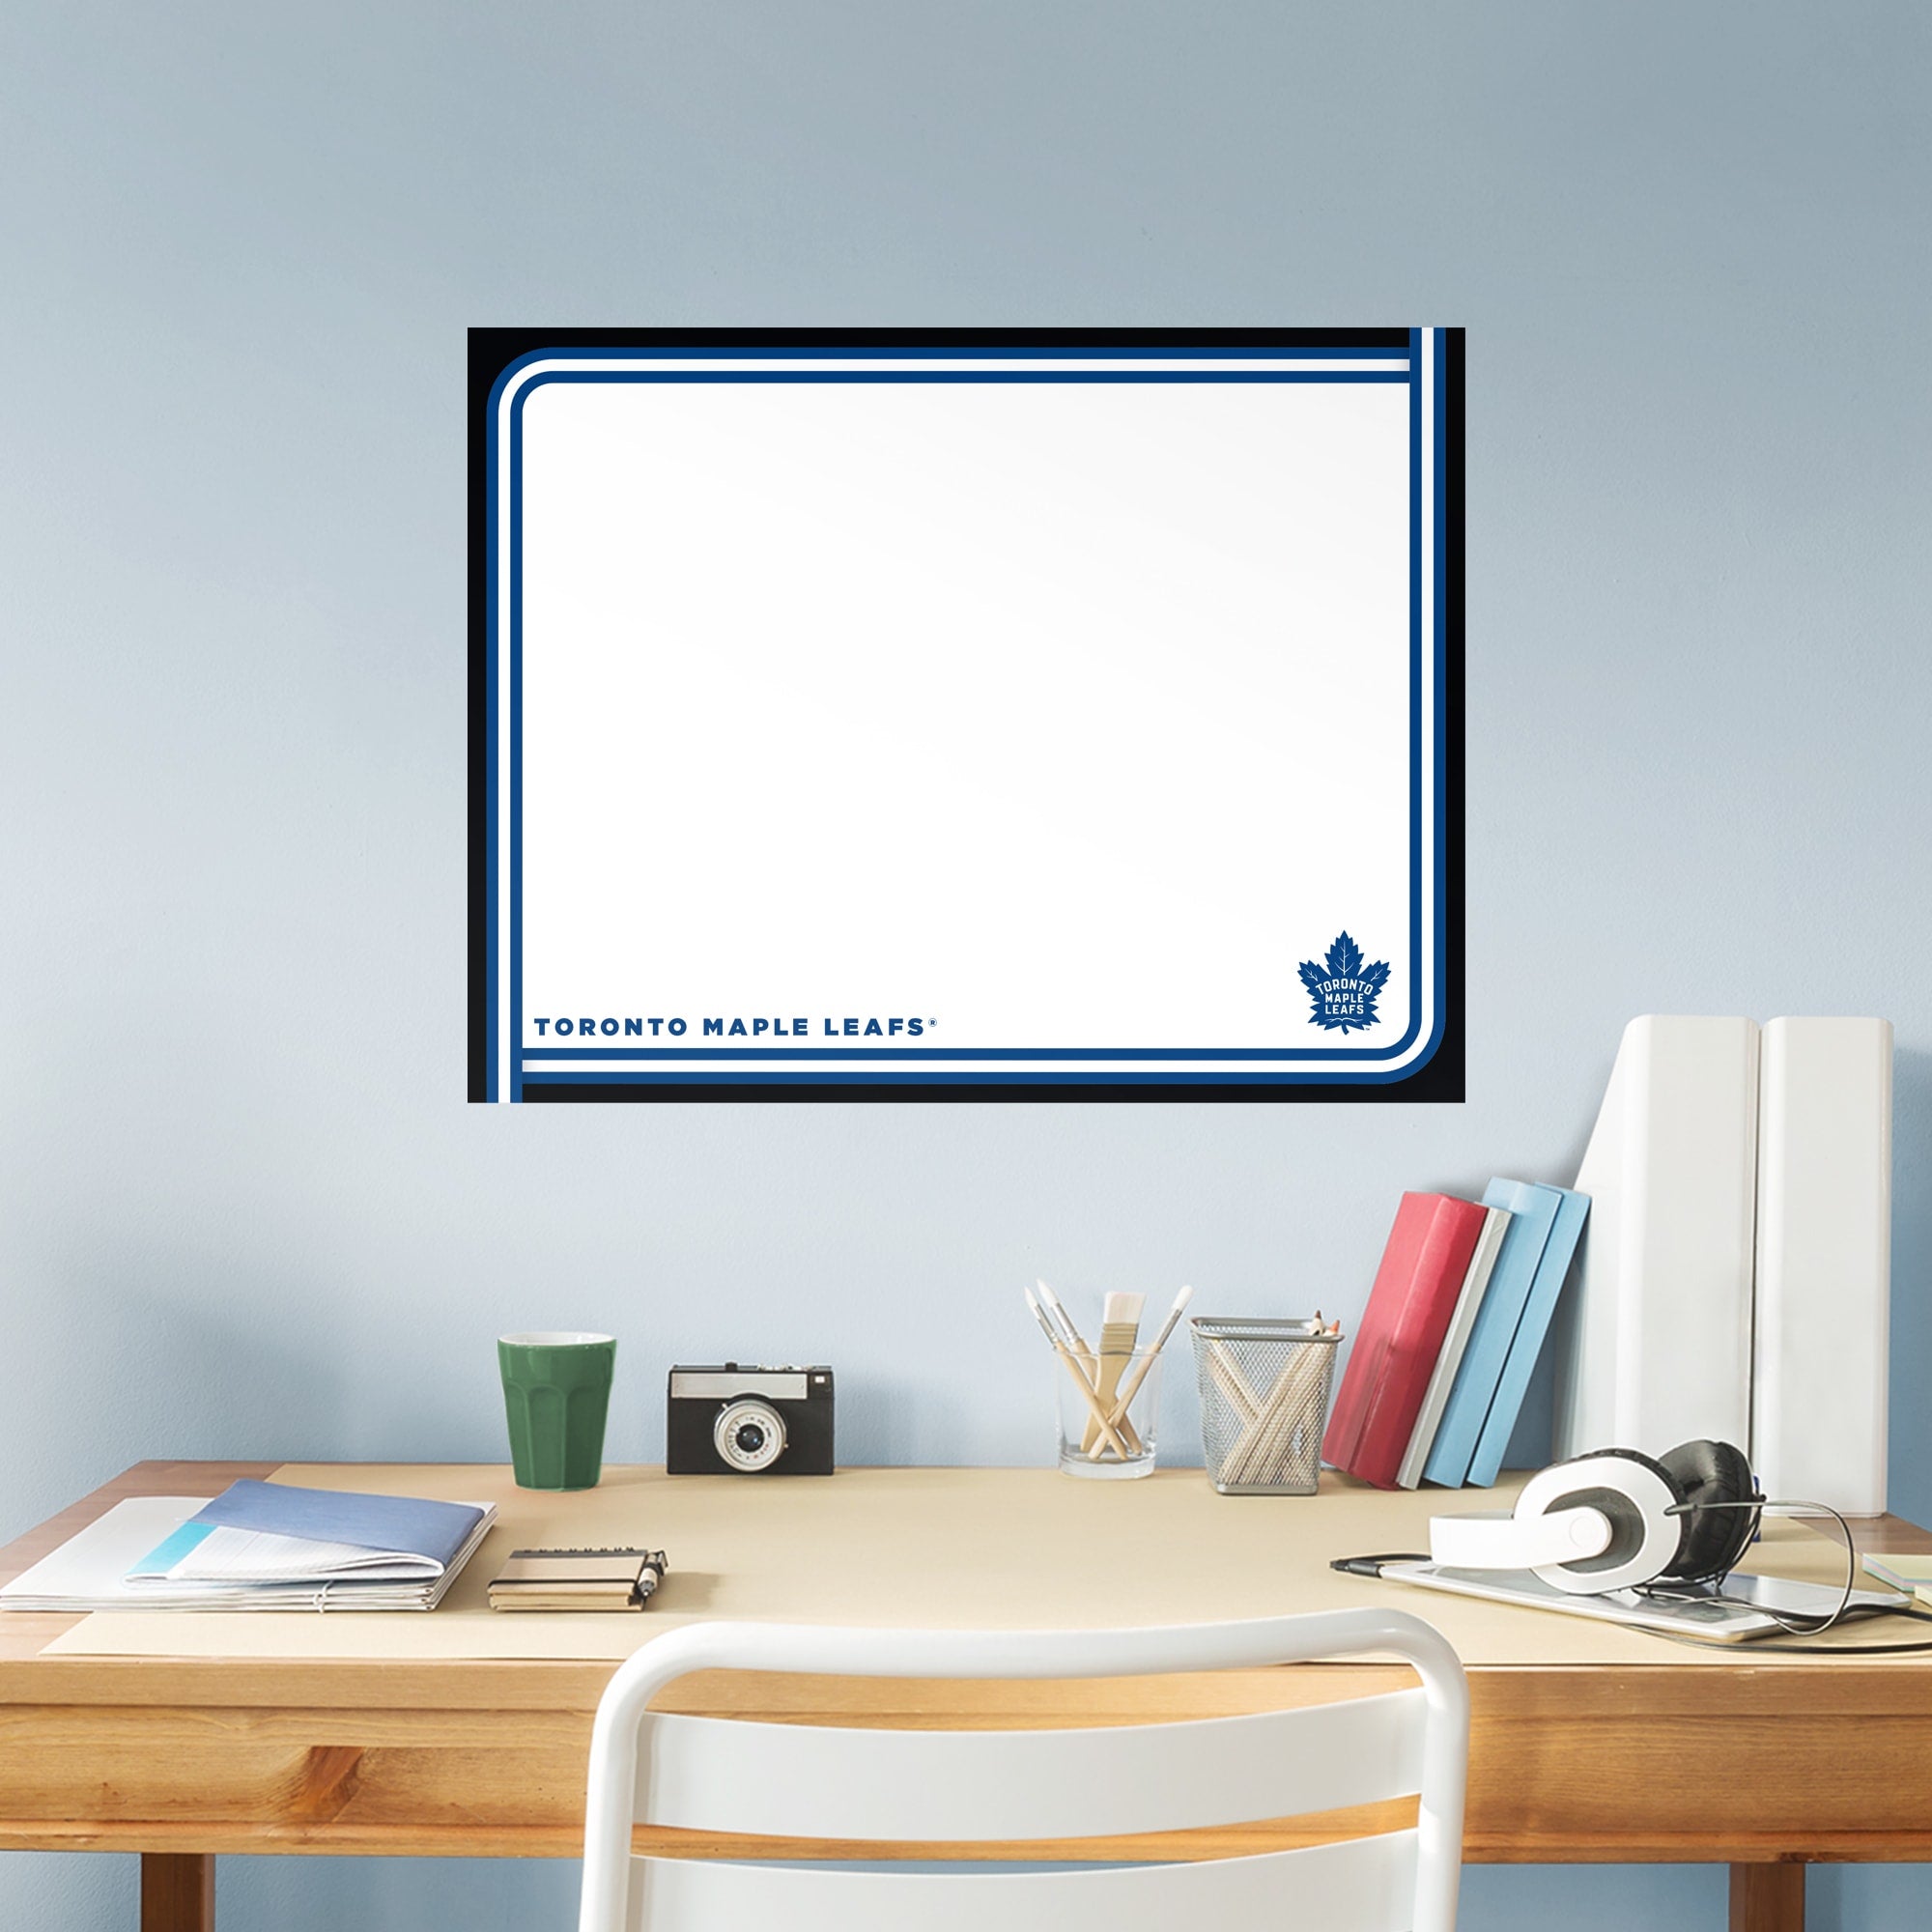 Toronto Maple Leafs: Dry Erase Whiteboard - X-Large Officially Licensed NHL Removable Wall Decal XL by Fathead | Vinyl